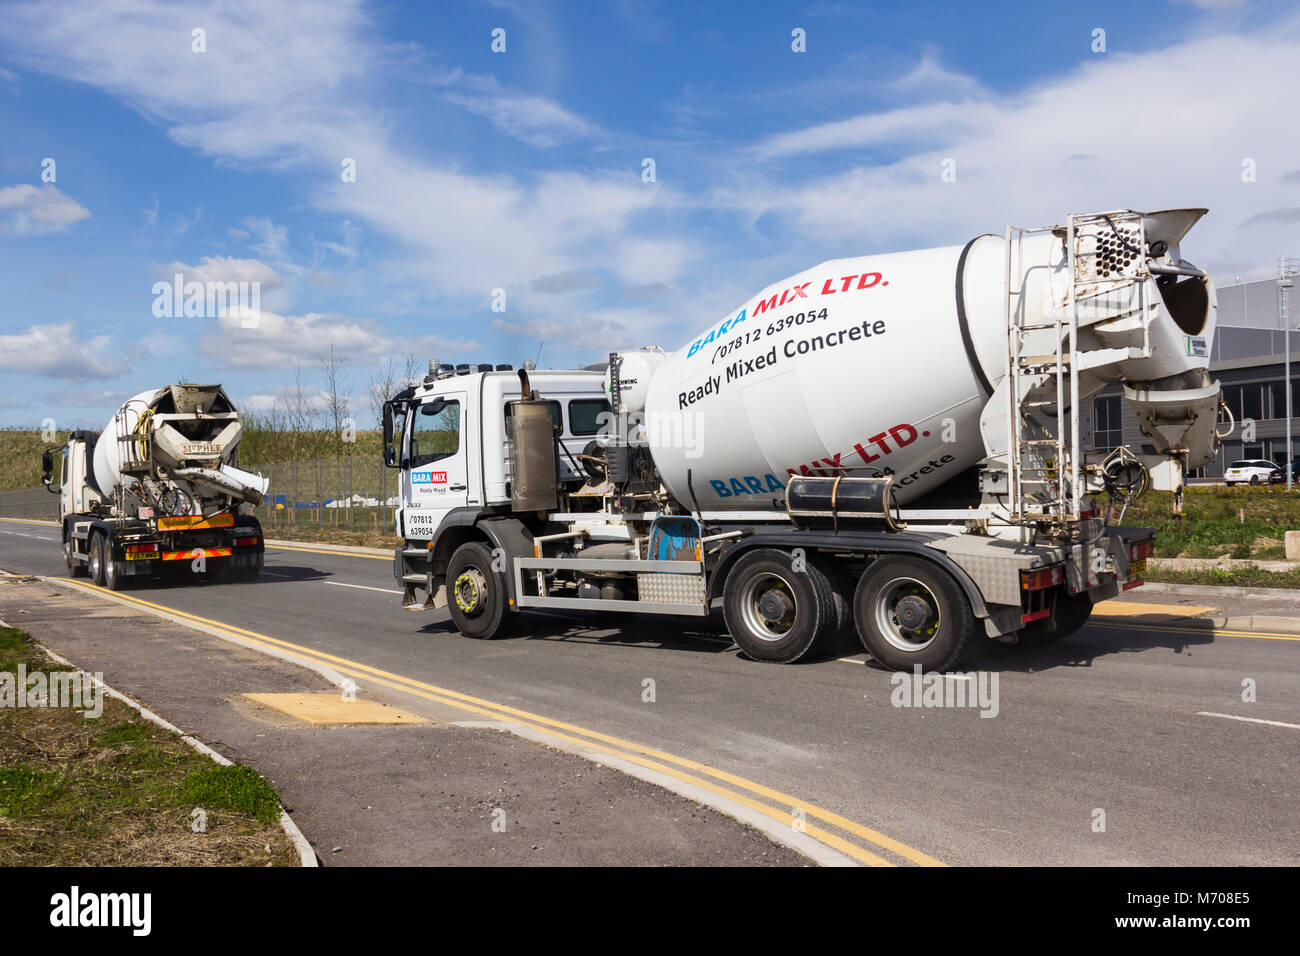 Two Baramix concrete mixing trucks, aka concrete lorry, leaving a construction site at Logistics North business and distribution park. Stock Photo